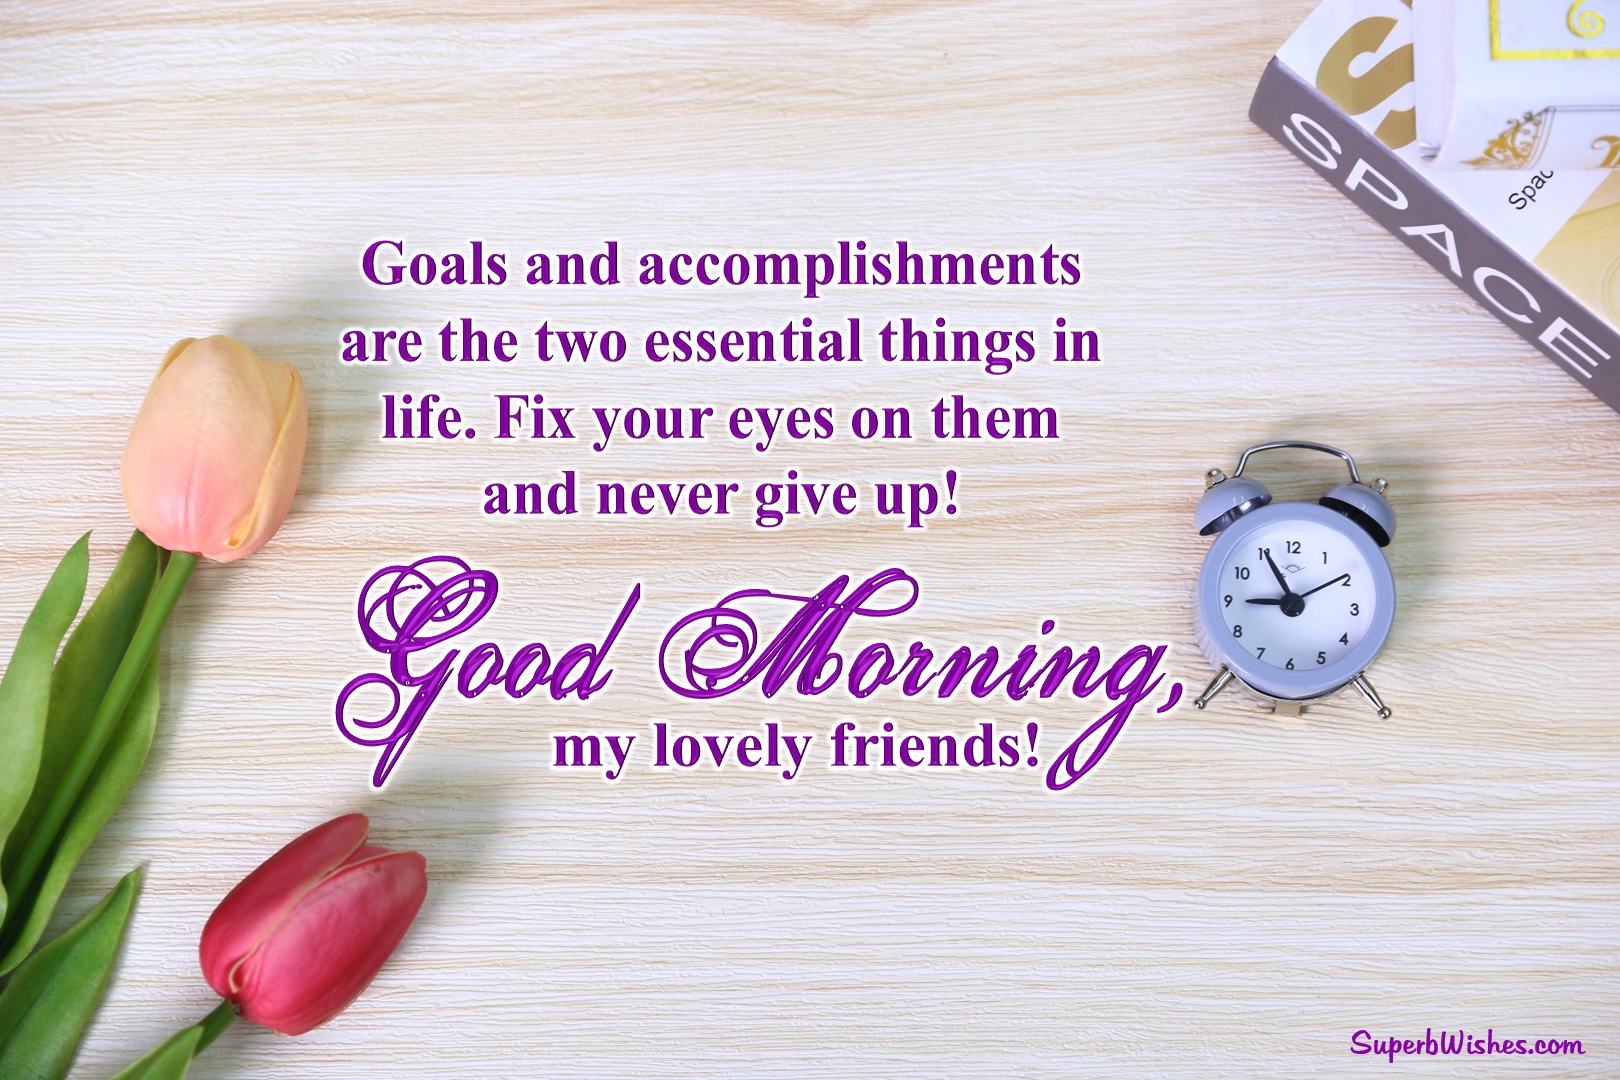 Free Good Morning Wishes For Friends. Superbwishes.com